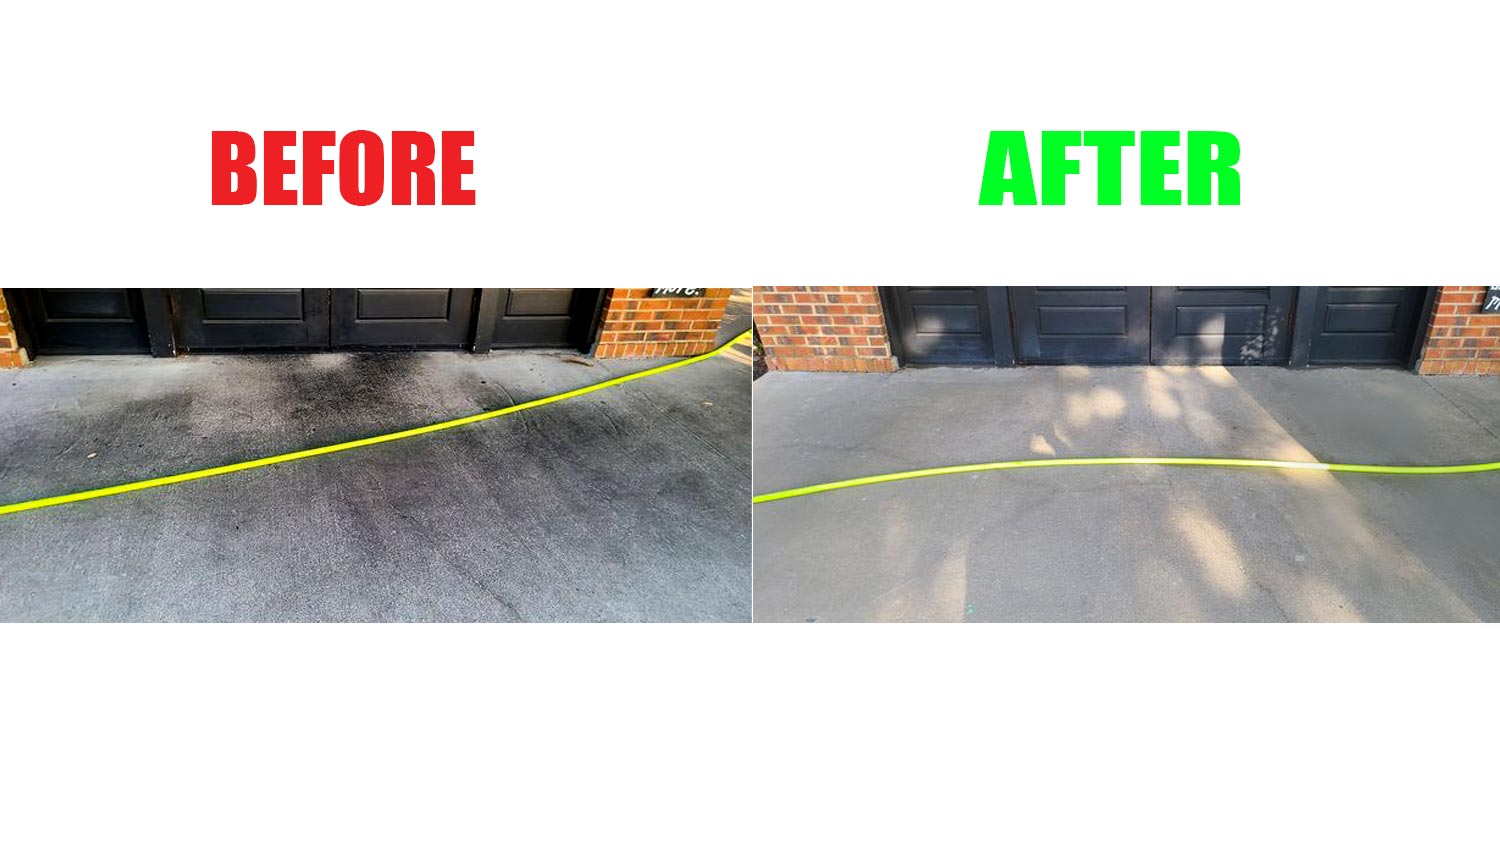 Nastee Industrial Degreaser - Concrete Clean - Remove oil stains - Before and after